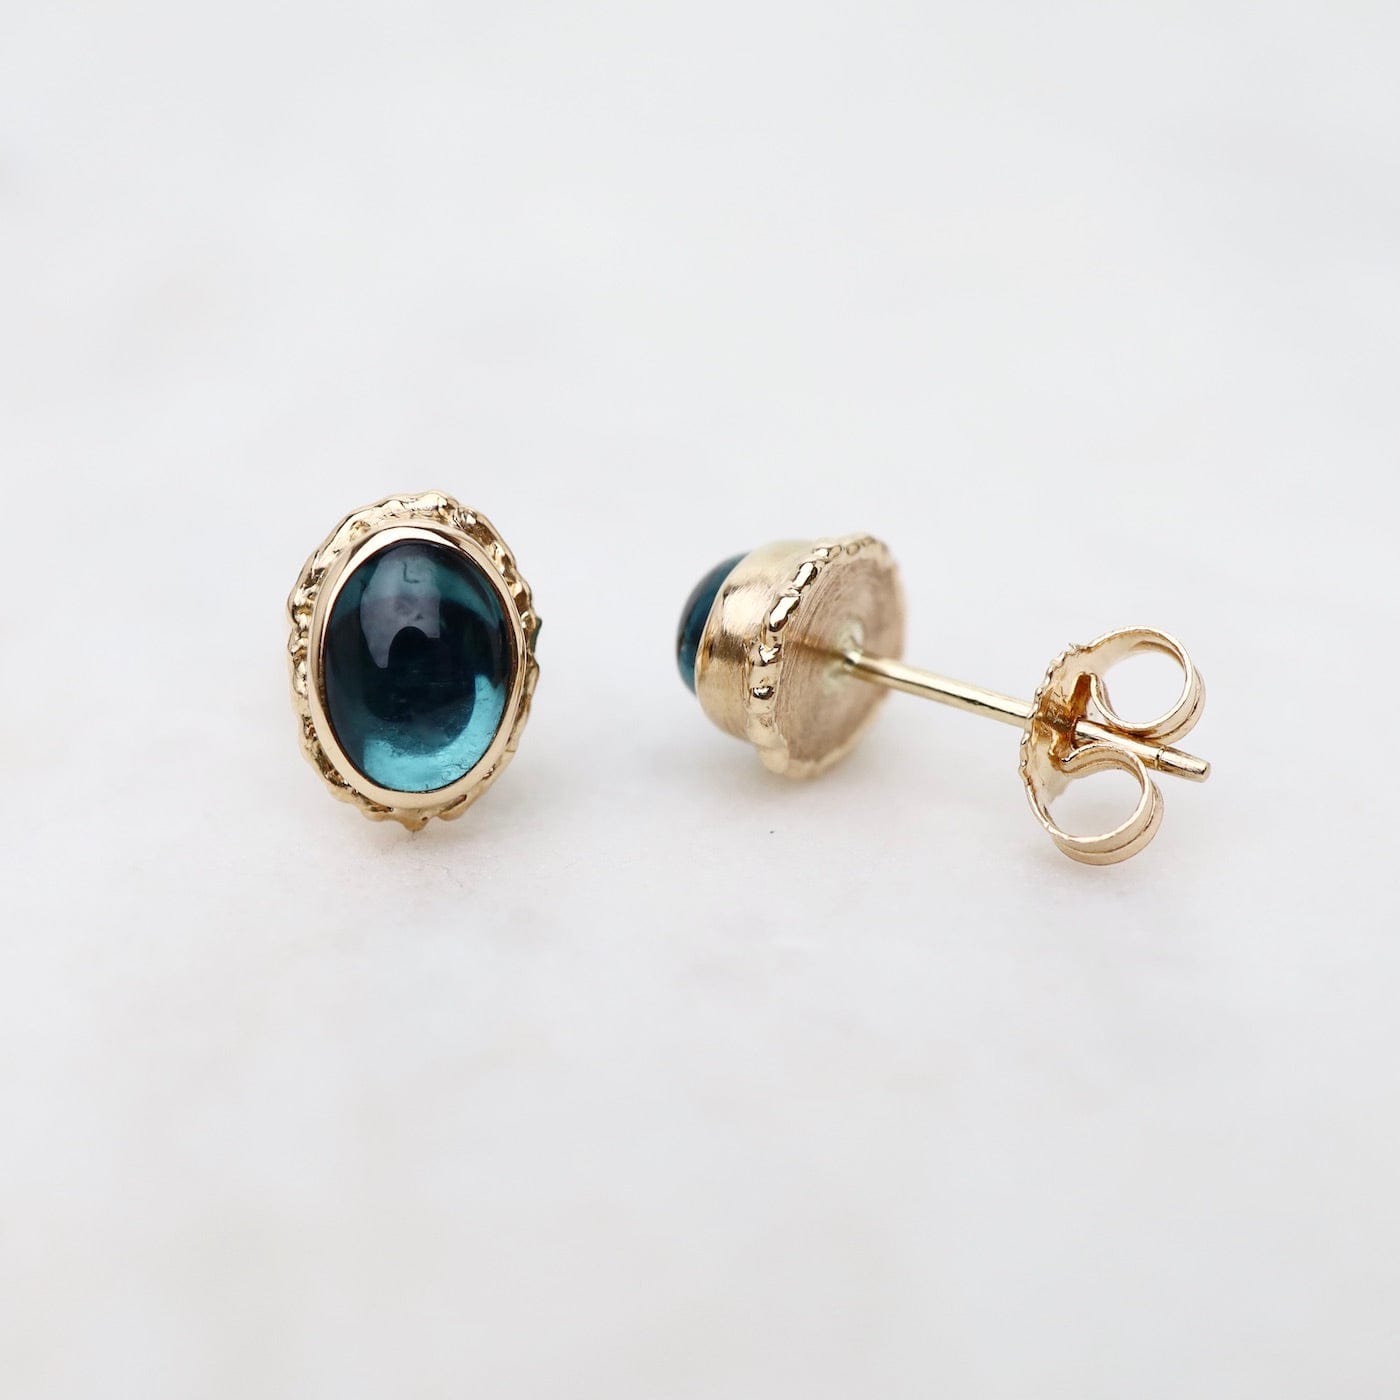 EAR-14K 14K Gold Post Earrings with Oval Smooth Indicolite